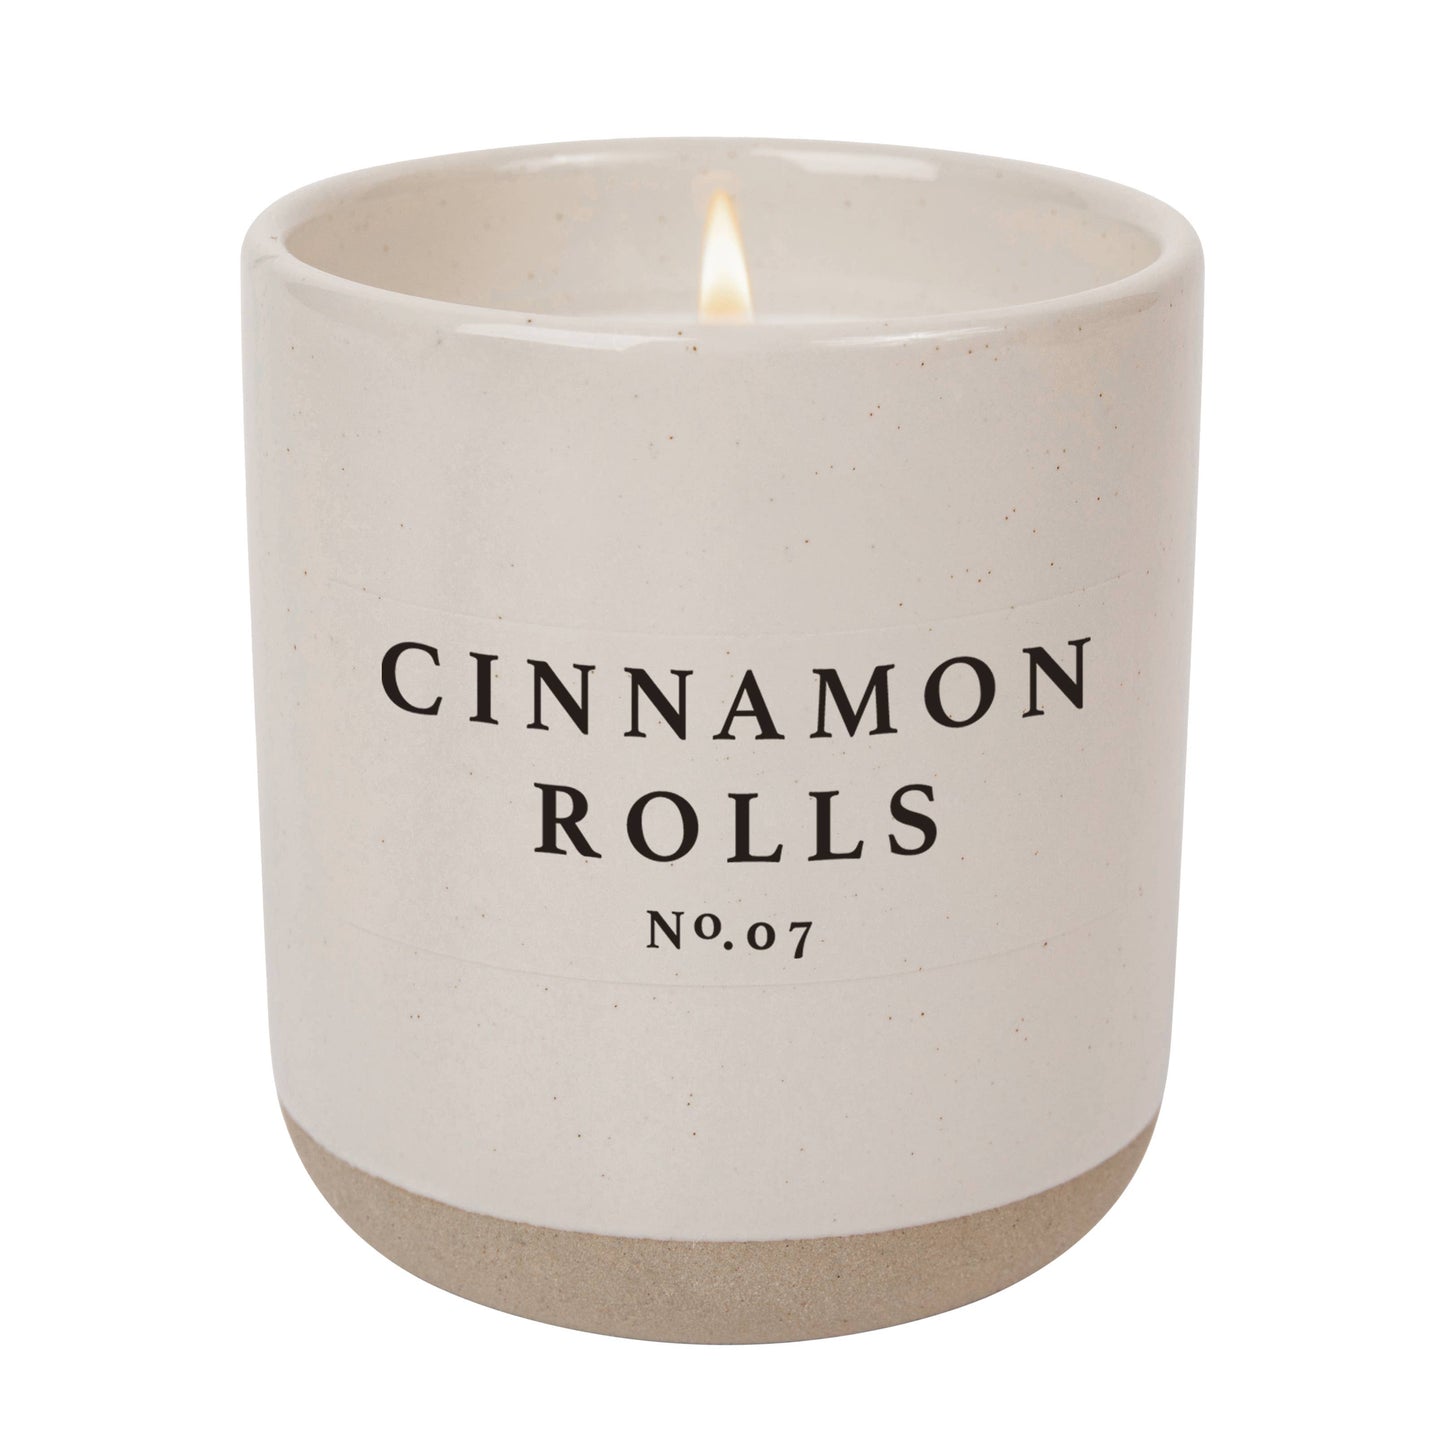 The CINNAMON ROLL, 12oz Soy Candle